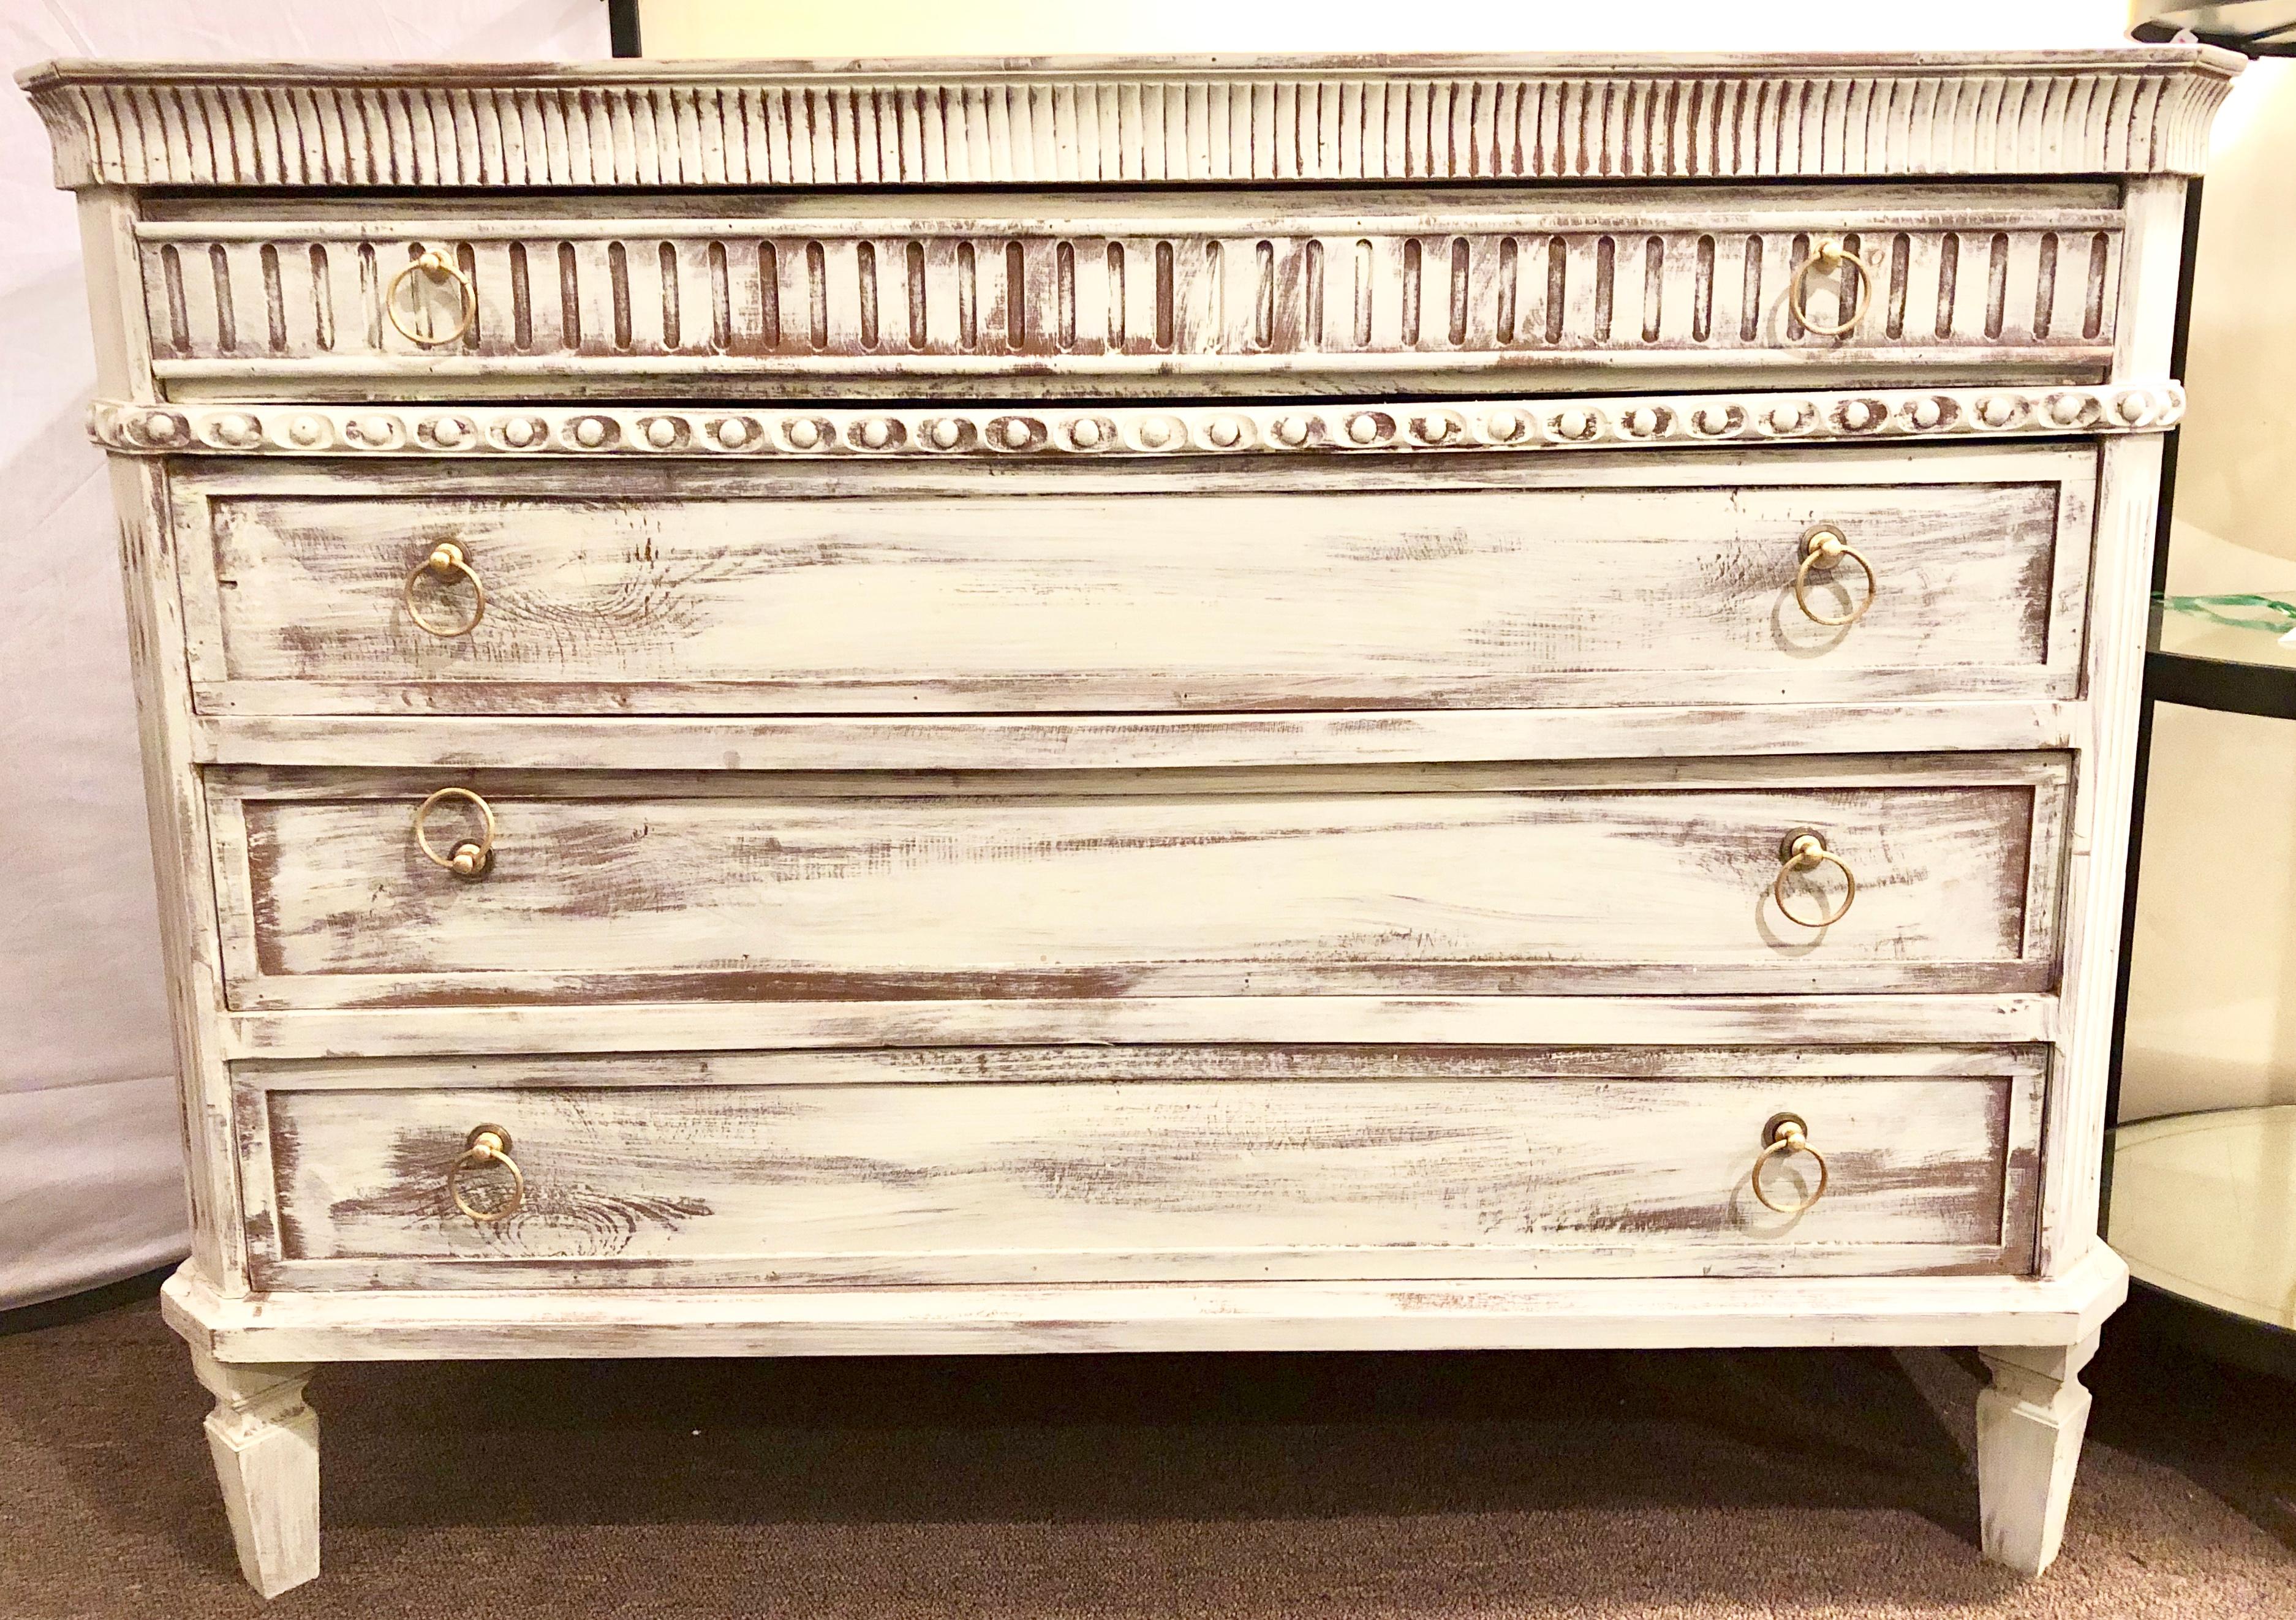 Pair of Swedish painted decorated commodes, chests or nightstands each having four drawers in a distressed finish. The smaller top drawer with carved reeded panel front with three larger drawers following.


Lia.